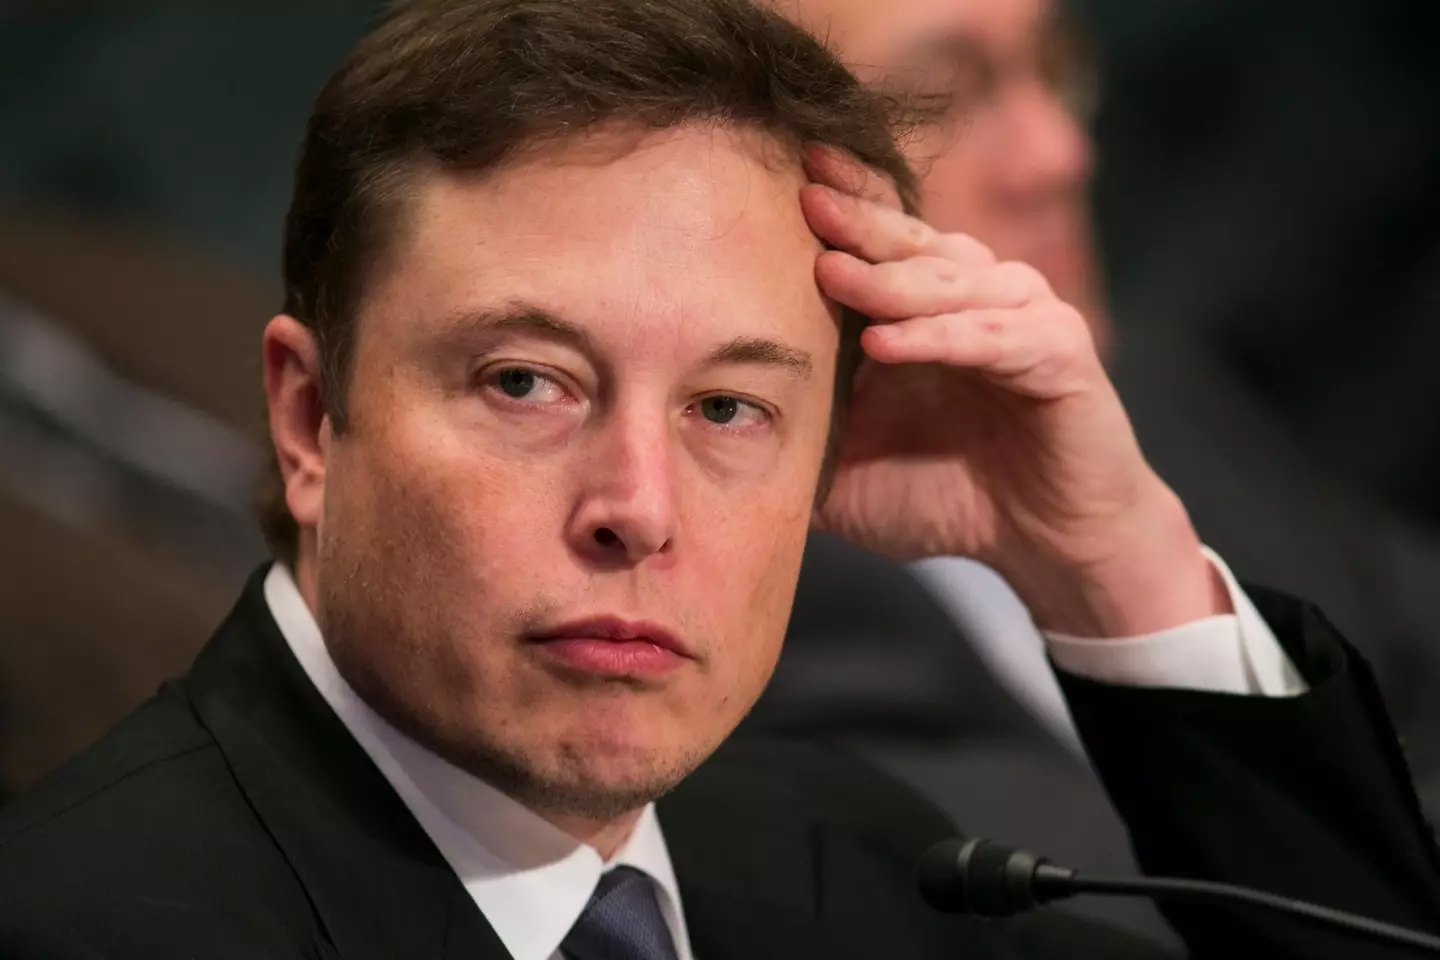 Some celebrities have revealed they're leaving Twitter after Musk took over the platform.